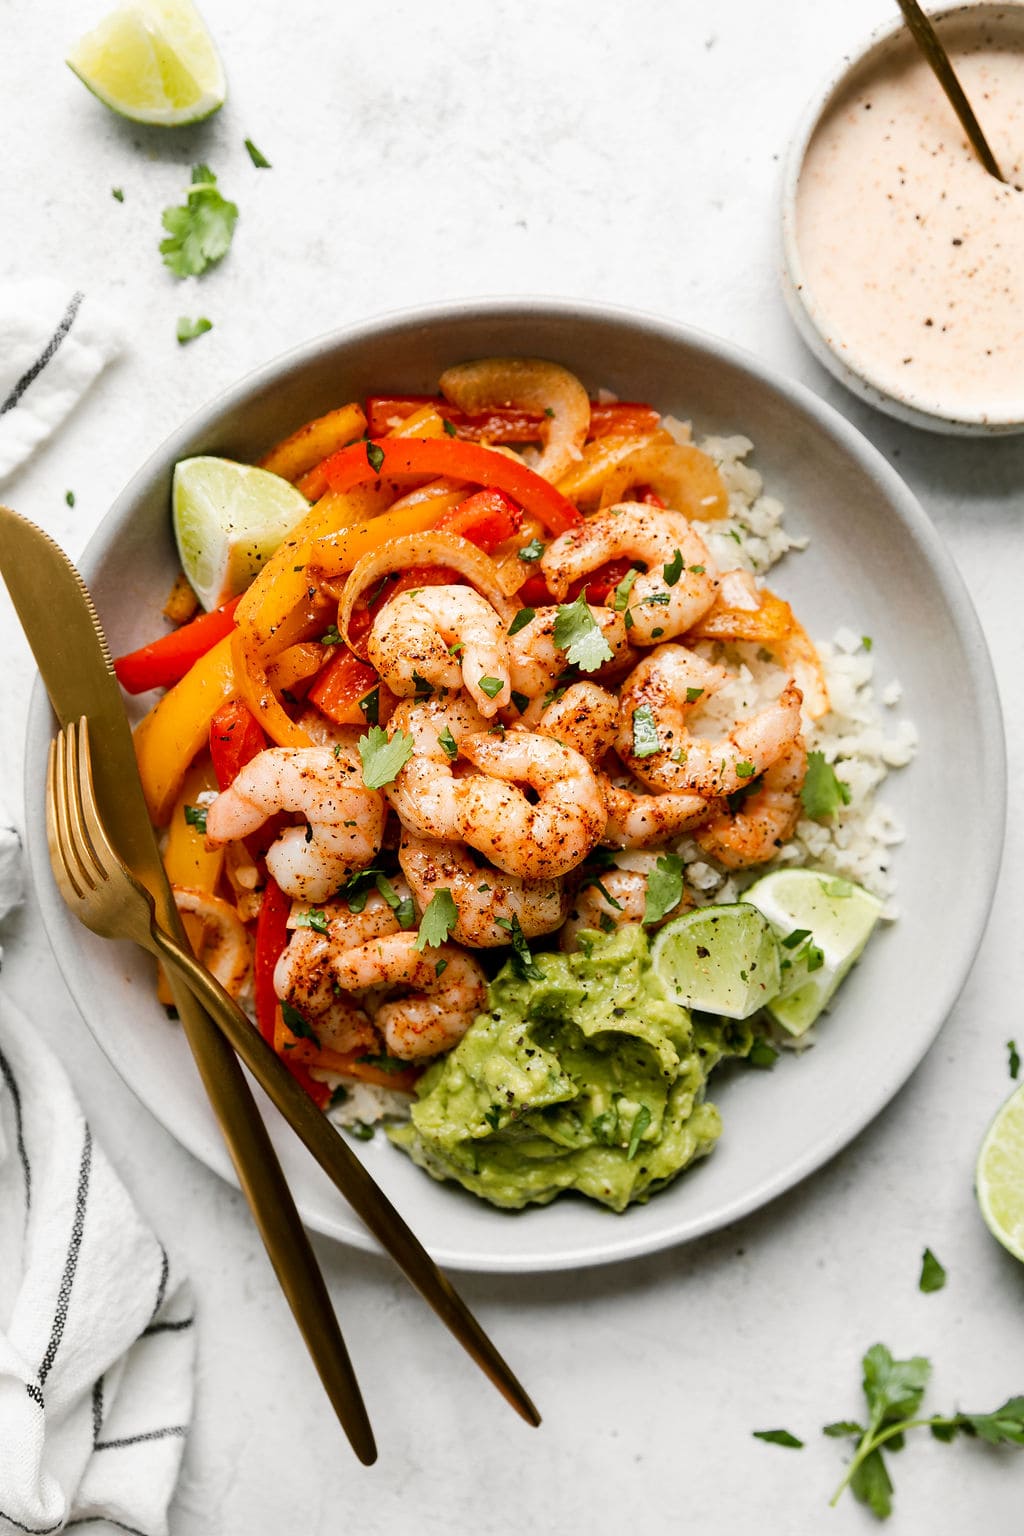 Overhead view of sheet pan shrimp fajita bowls served on a plate layered with cauliflower rice, peppers and onions, and topped with fajita shrimp. Avocado and limes on the side.